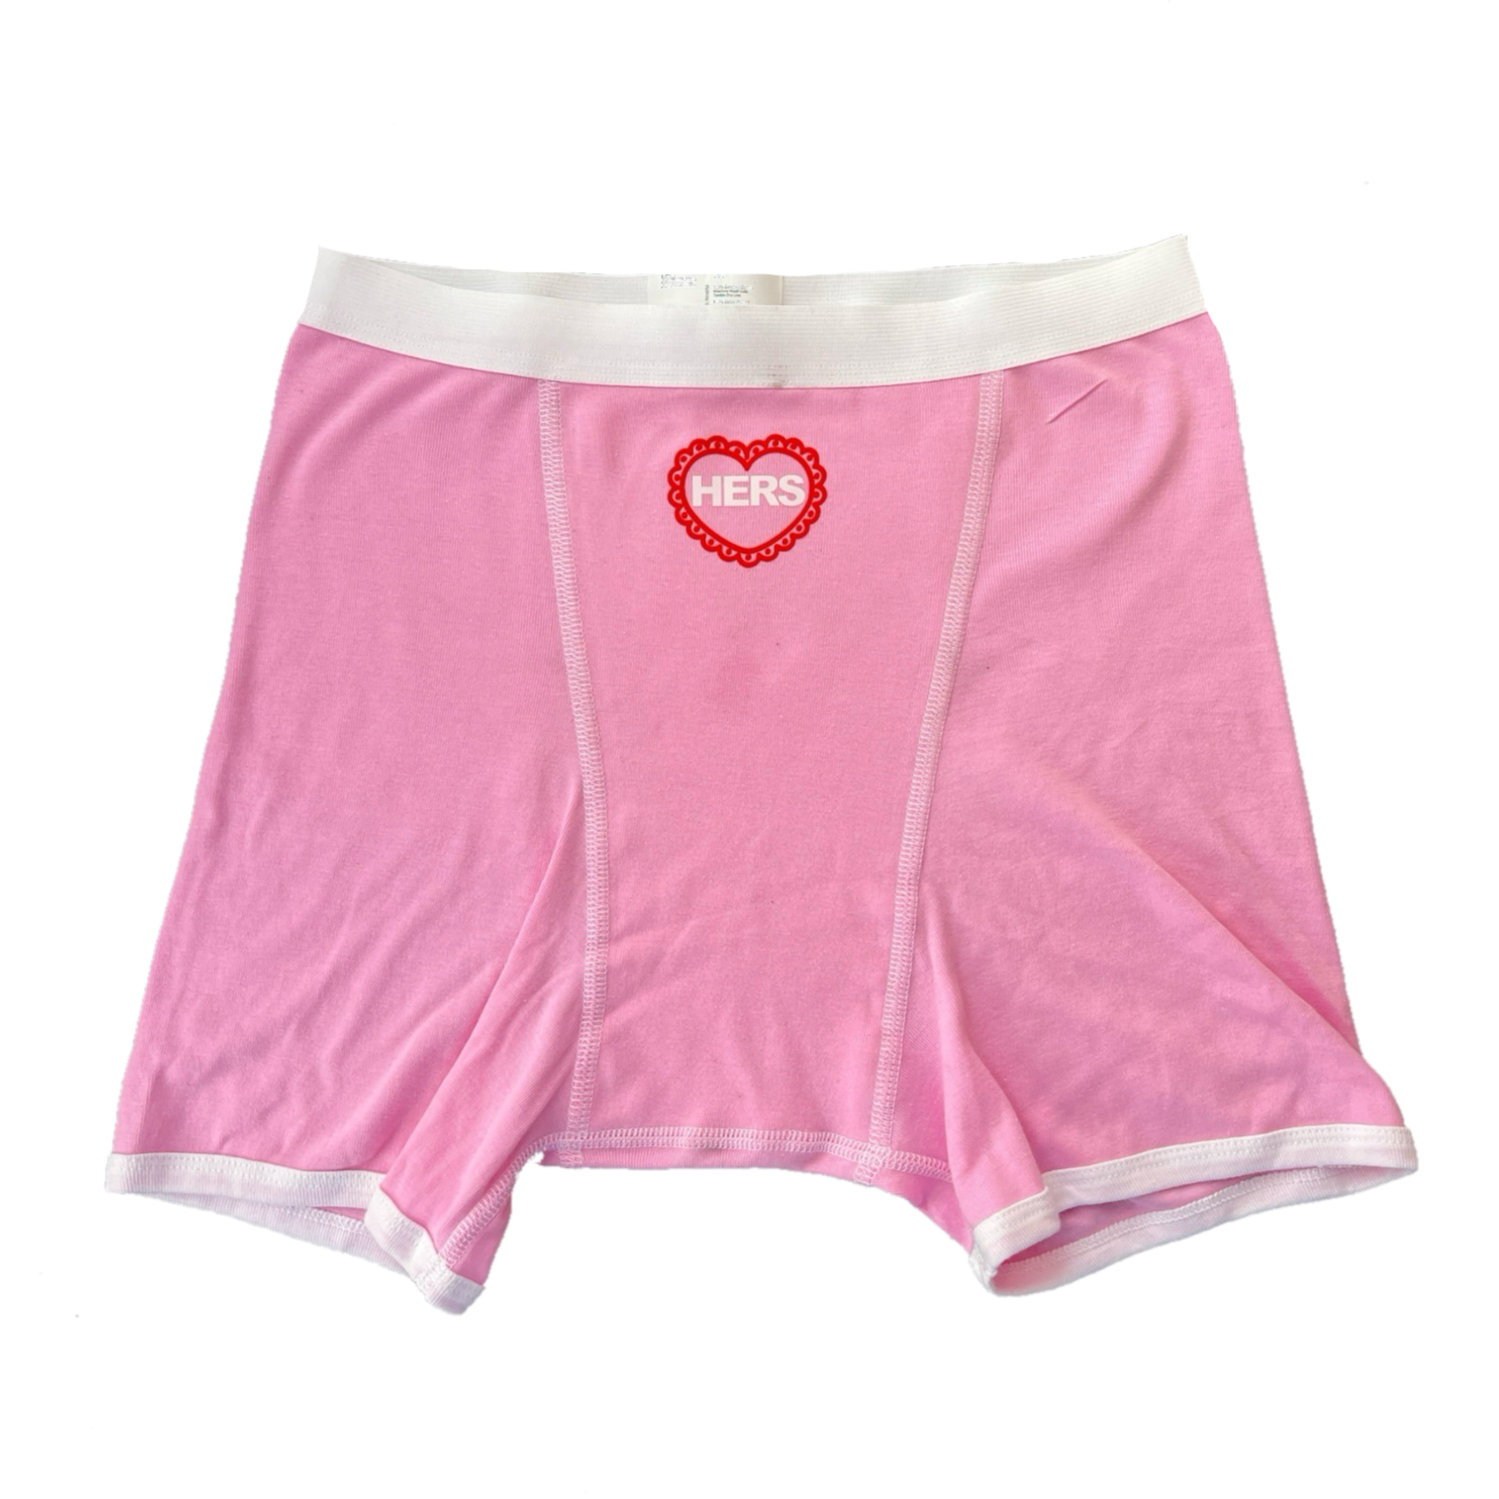 "HERS" Boxers Briefs